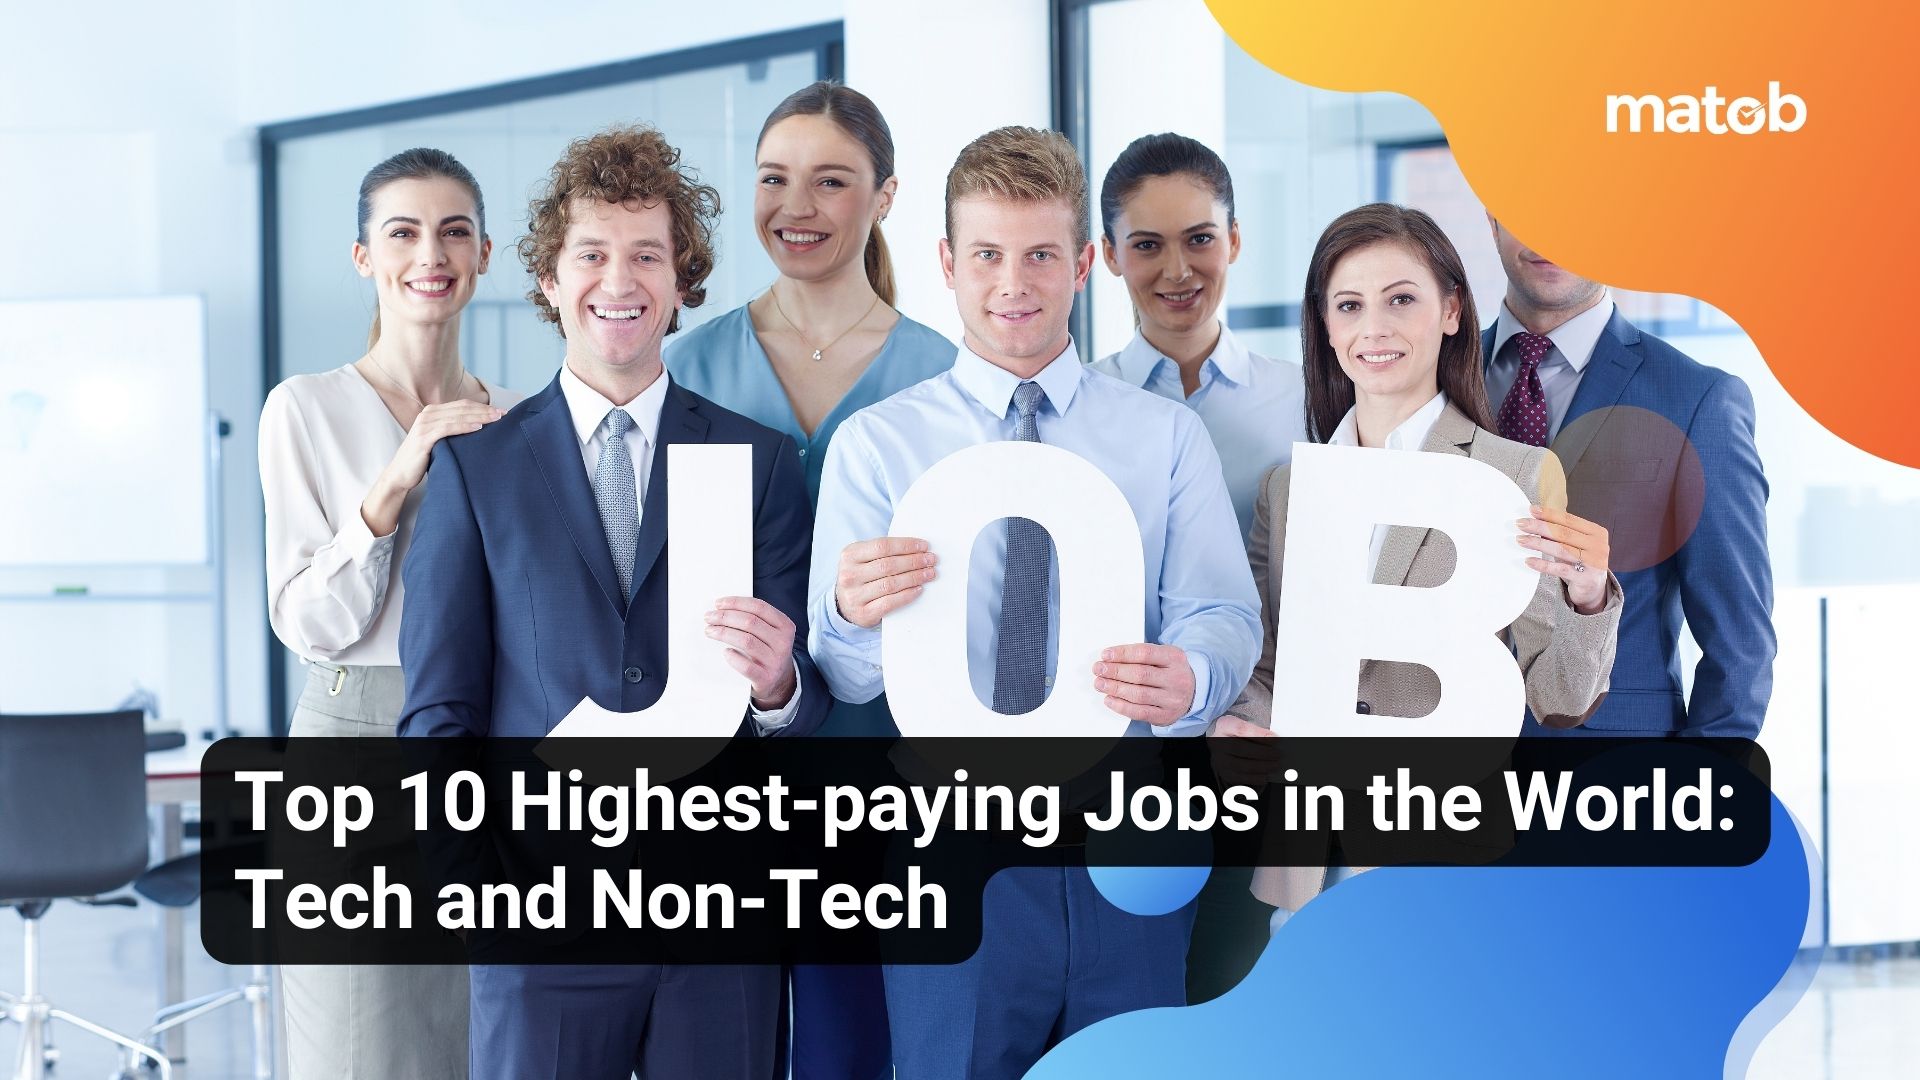 Top 10 Highest-paying Jobs in the World: Tech and Non-Tech